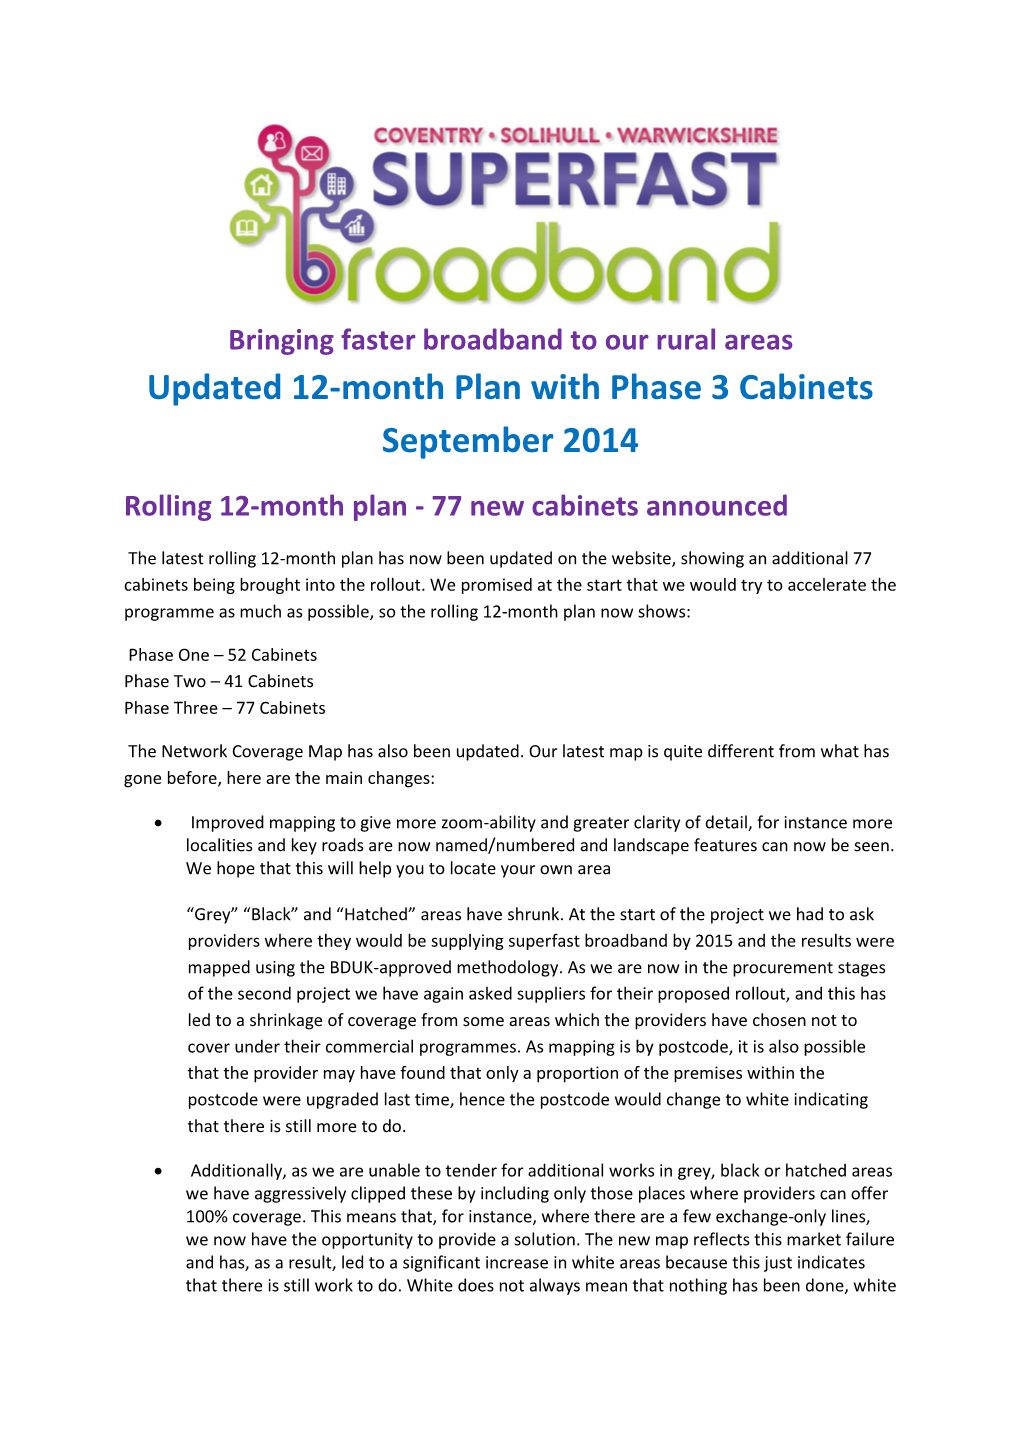 Updated 12-Month Plan with Phase 3 Cabinets September 2014